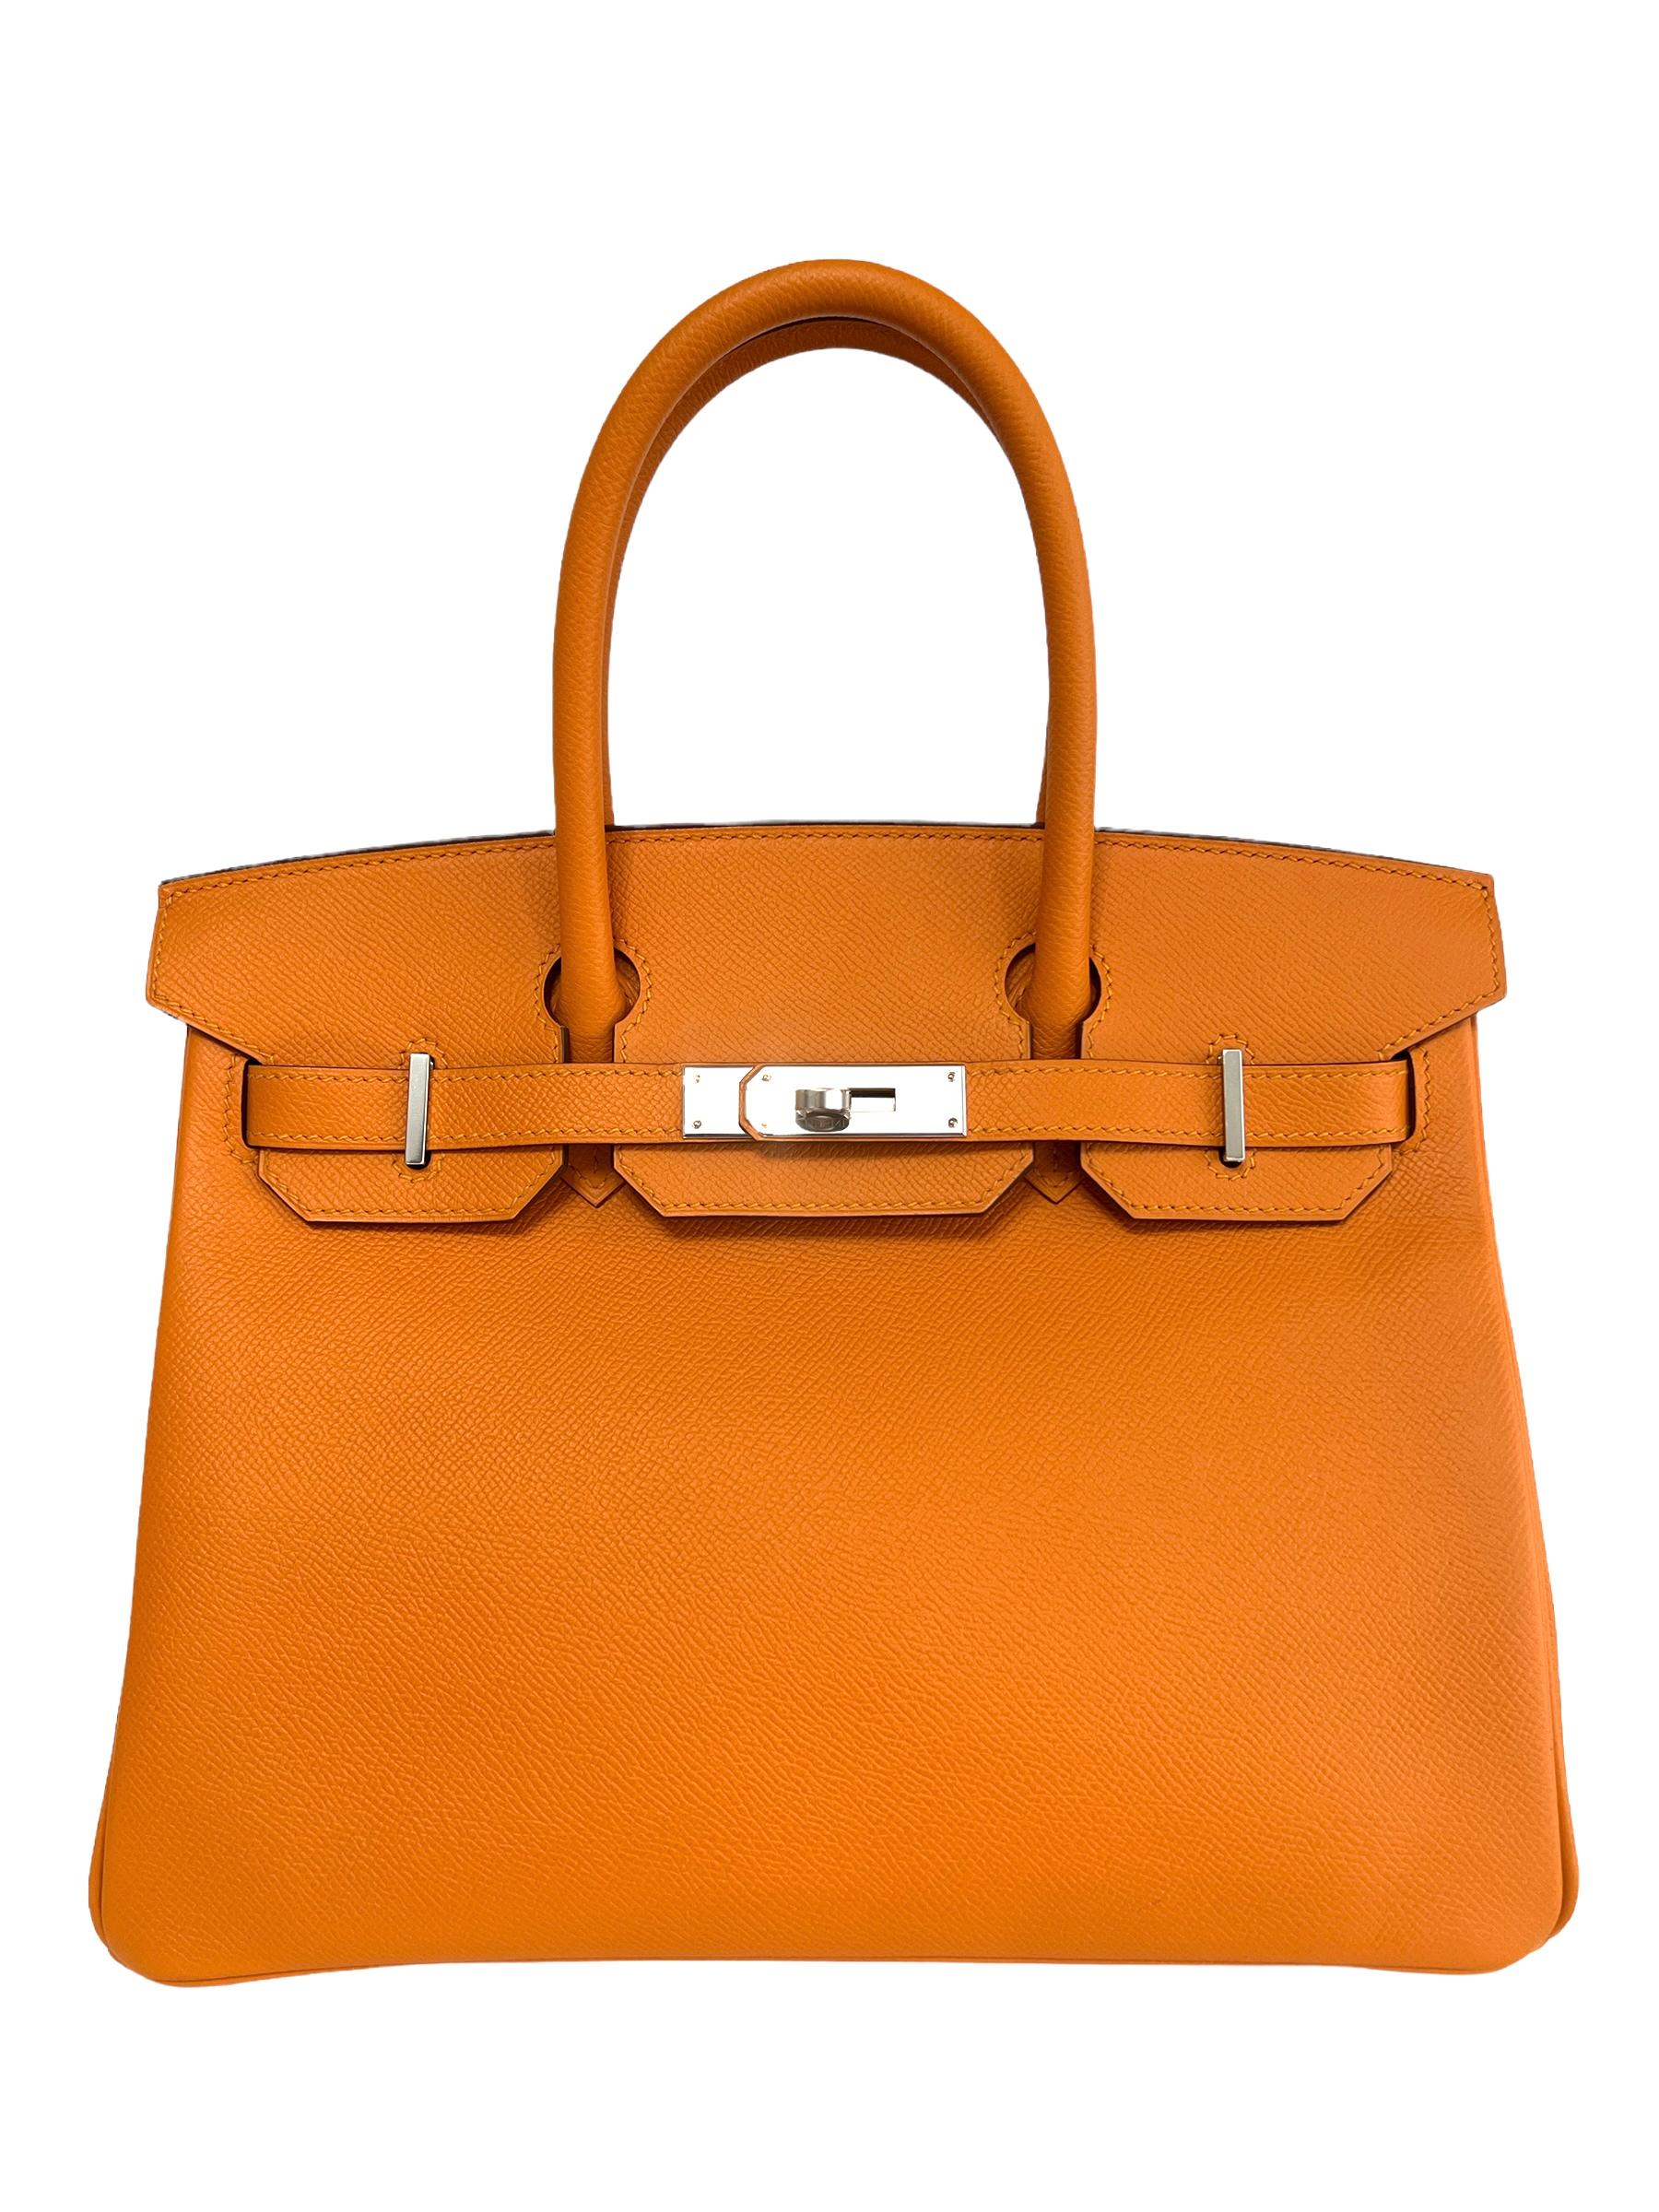 Absolutely Stunning Like New Condition Hermes Birkin 30 Apricot Orange Epsom Complimented by Palladium Hardware. 2018 with plastic on all hardware and feet. 

Shop with Confidence from Lux Addicts. Authenticity Guaranteed! 
